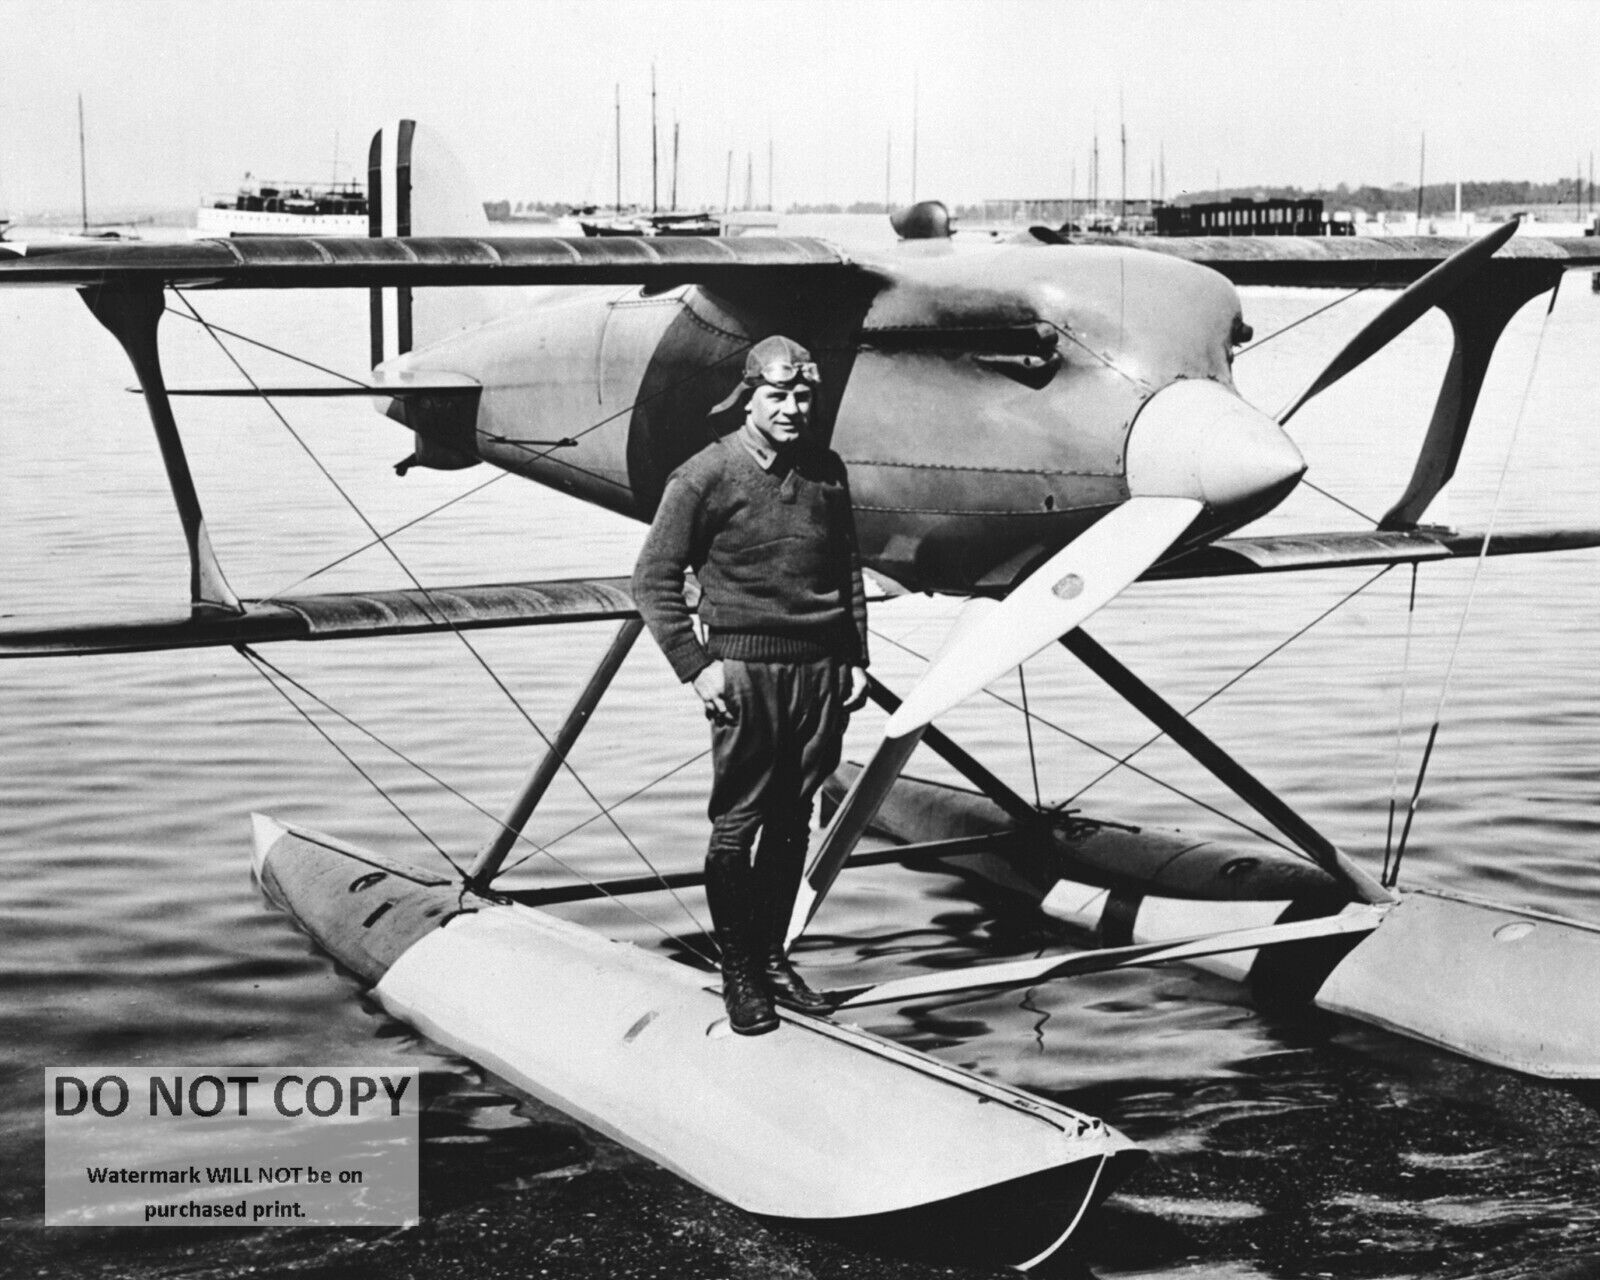 LT. JAMES DOOLITTLE WITH THE CURTIS R3C-2 RACER - 8X10 PHOTO (EE-317)